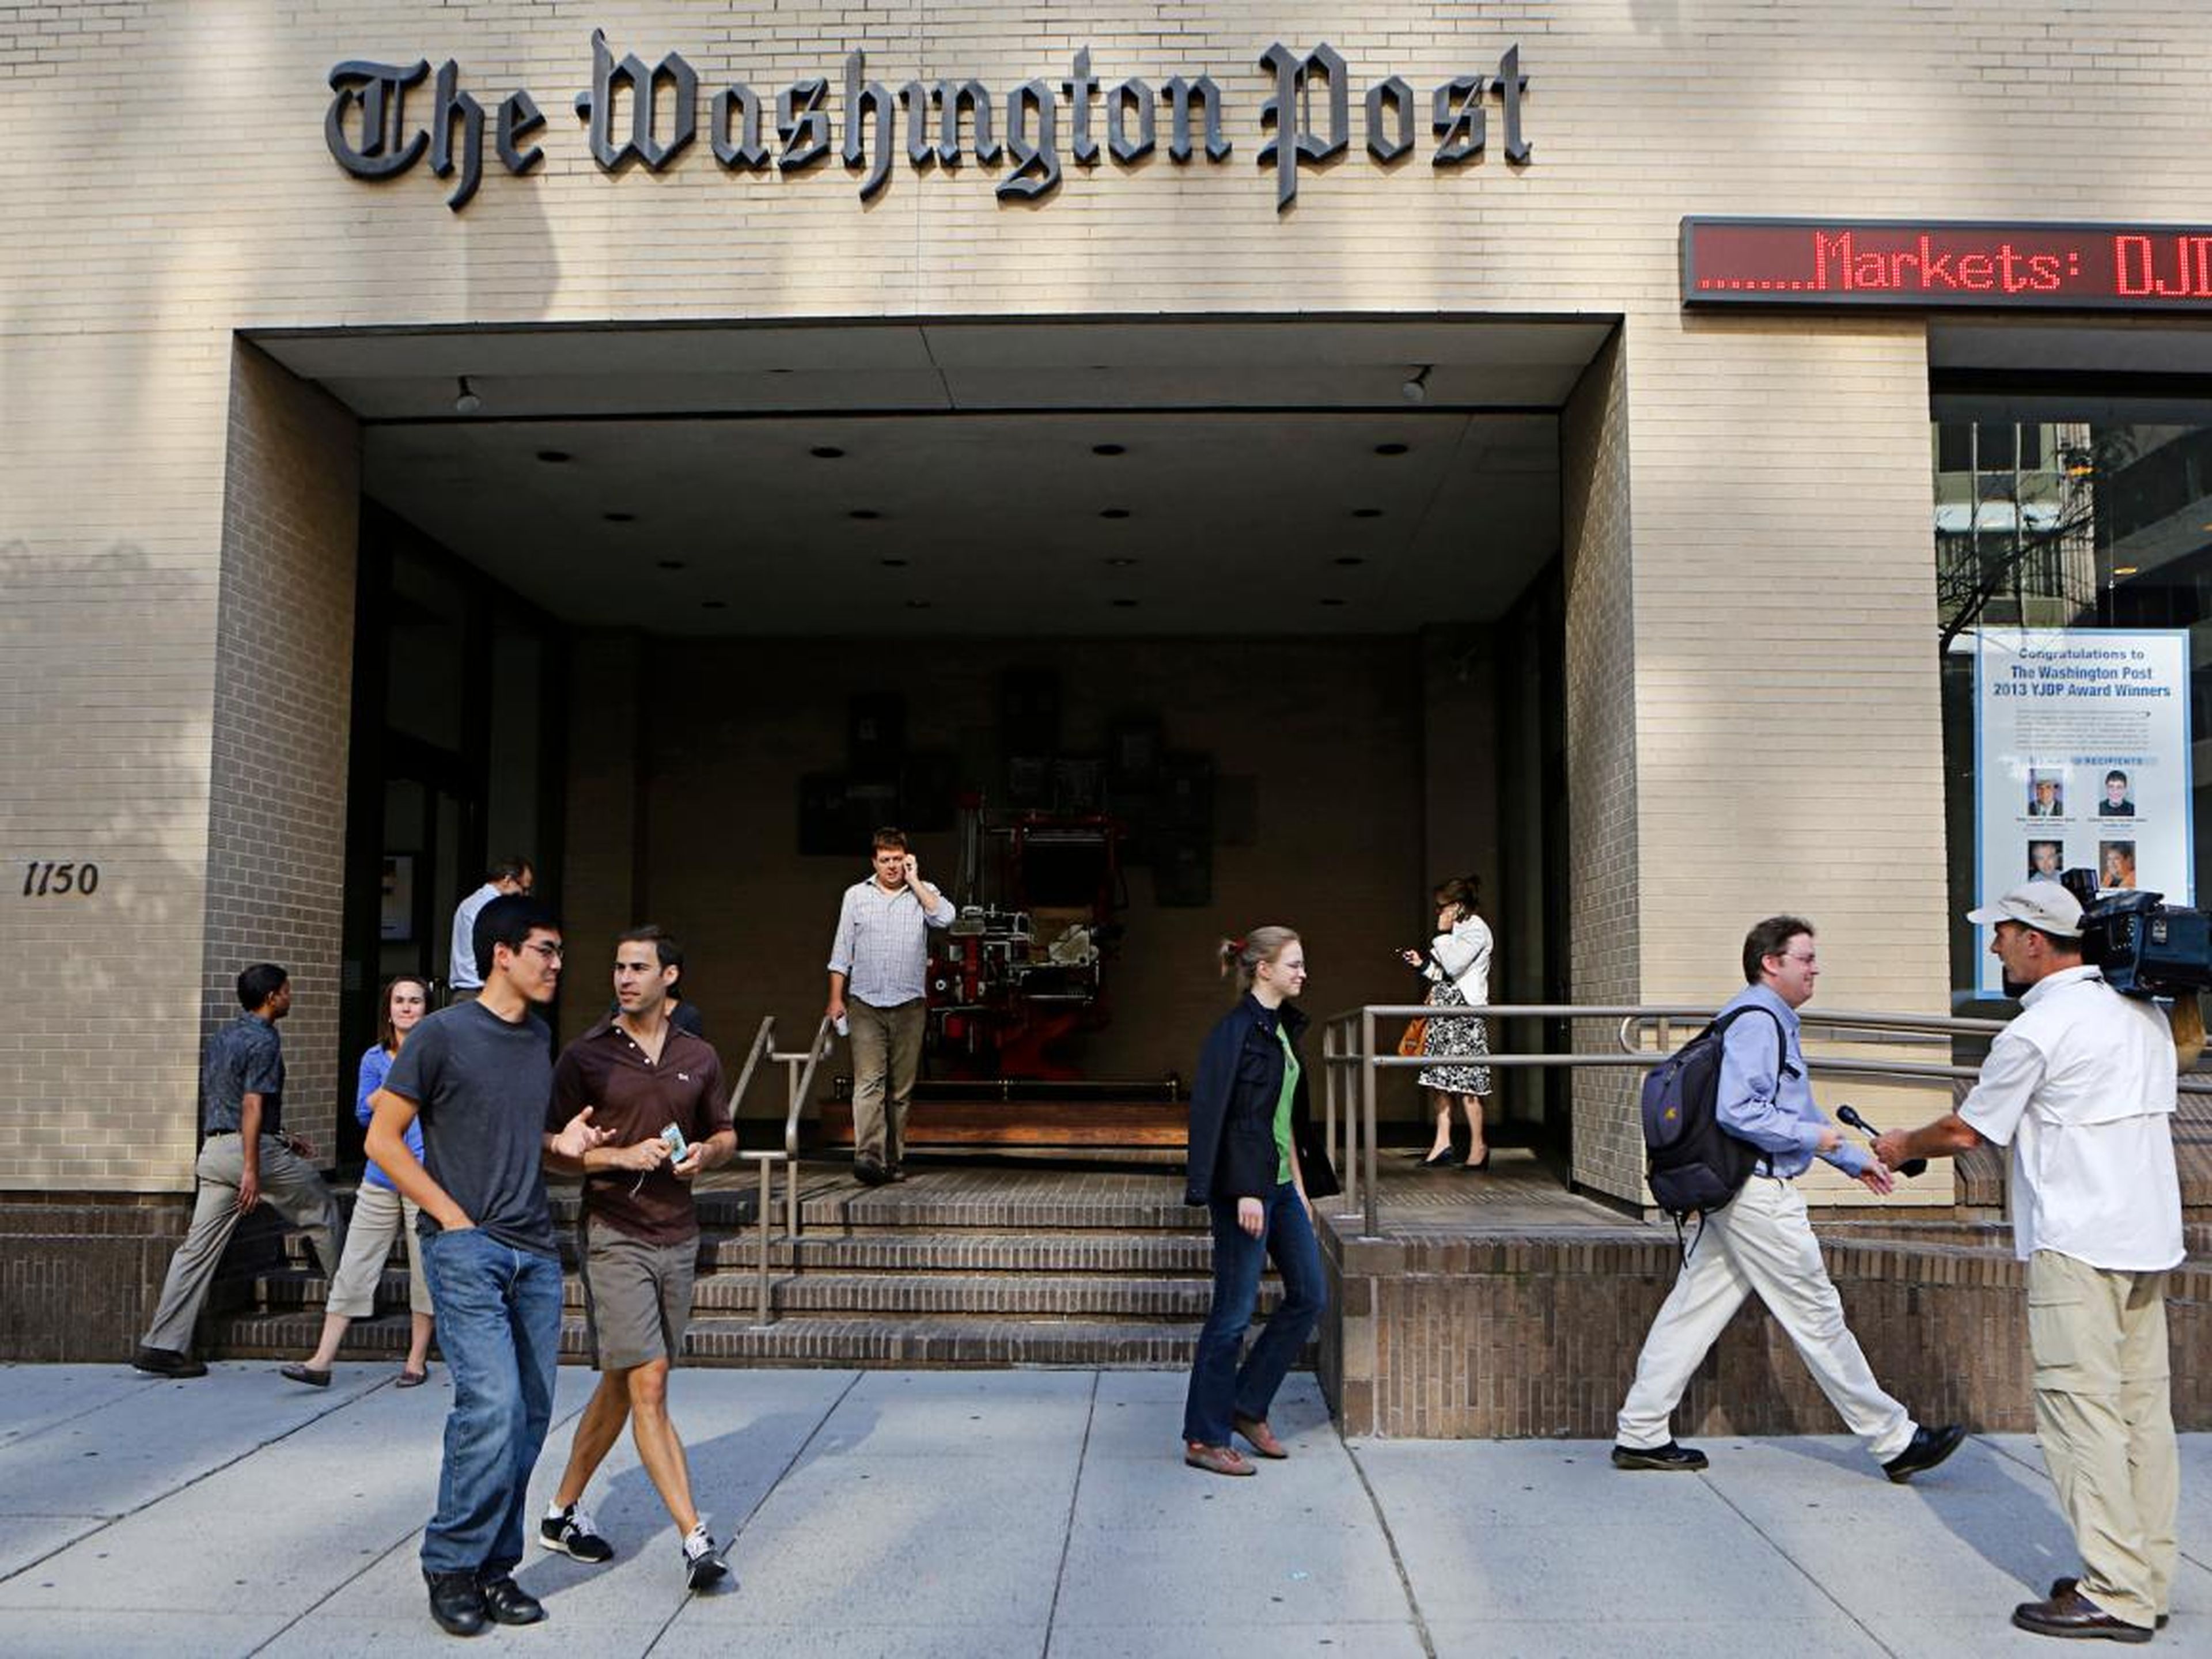 China just blocked The Washington Post and The Guardian from the country's internet